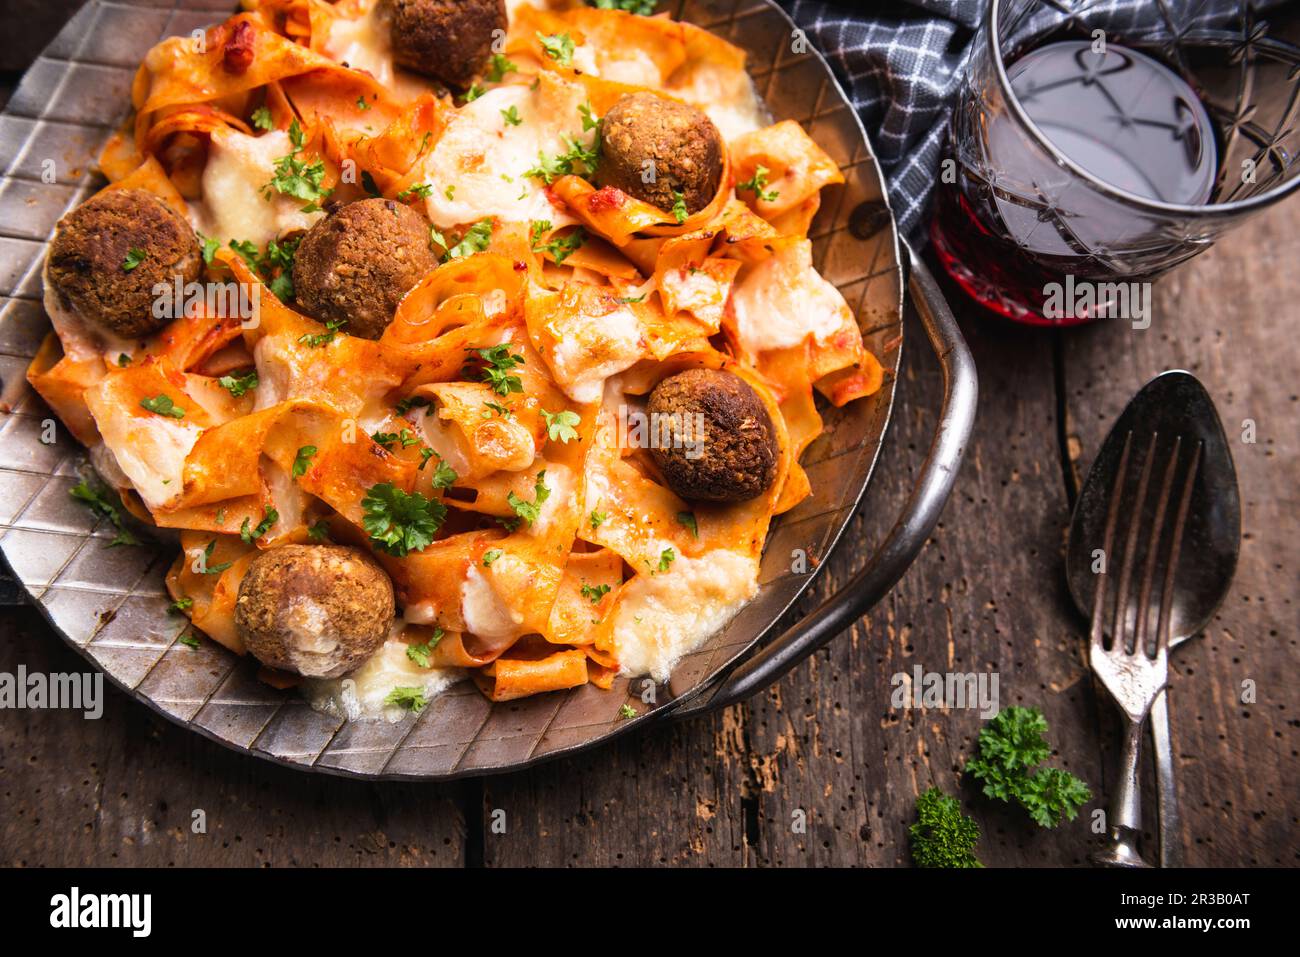 Gratinated tagliatelle with chickpea balls, tomato sauce and almond cheese Stock Photo